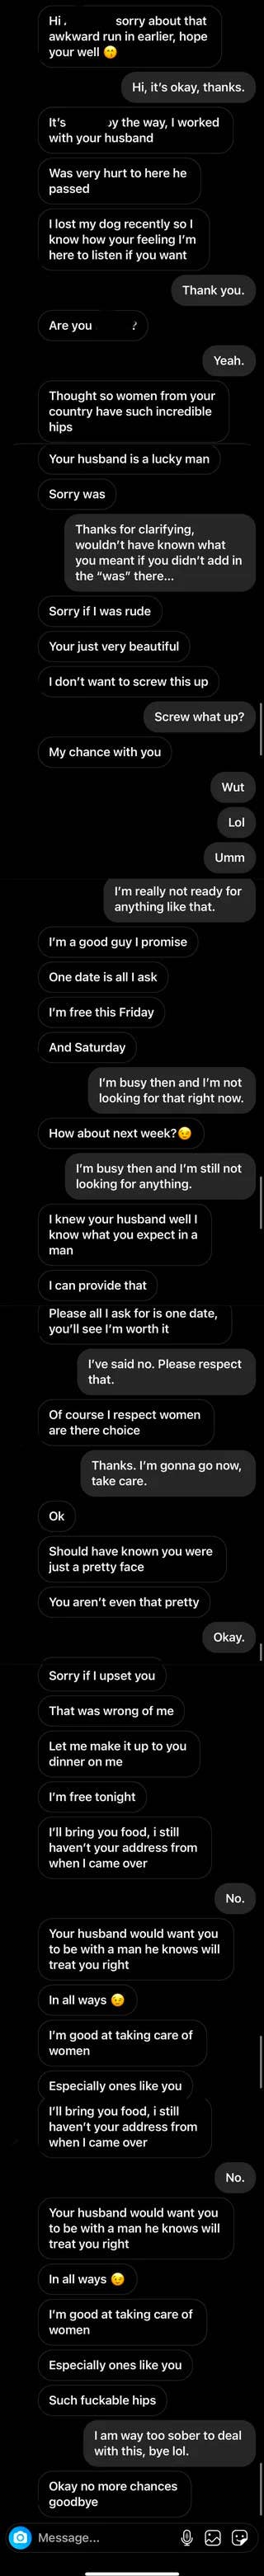 Someone tries to hit on the spouse of his former co-worker, who passed away